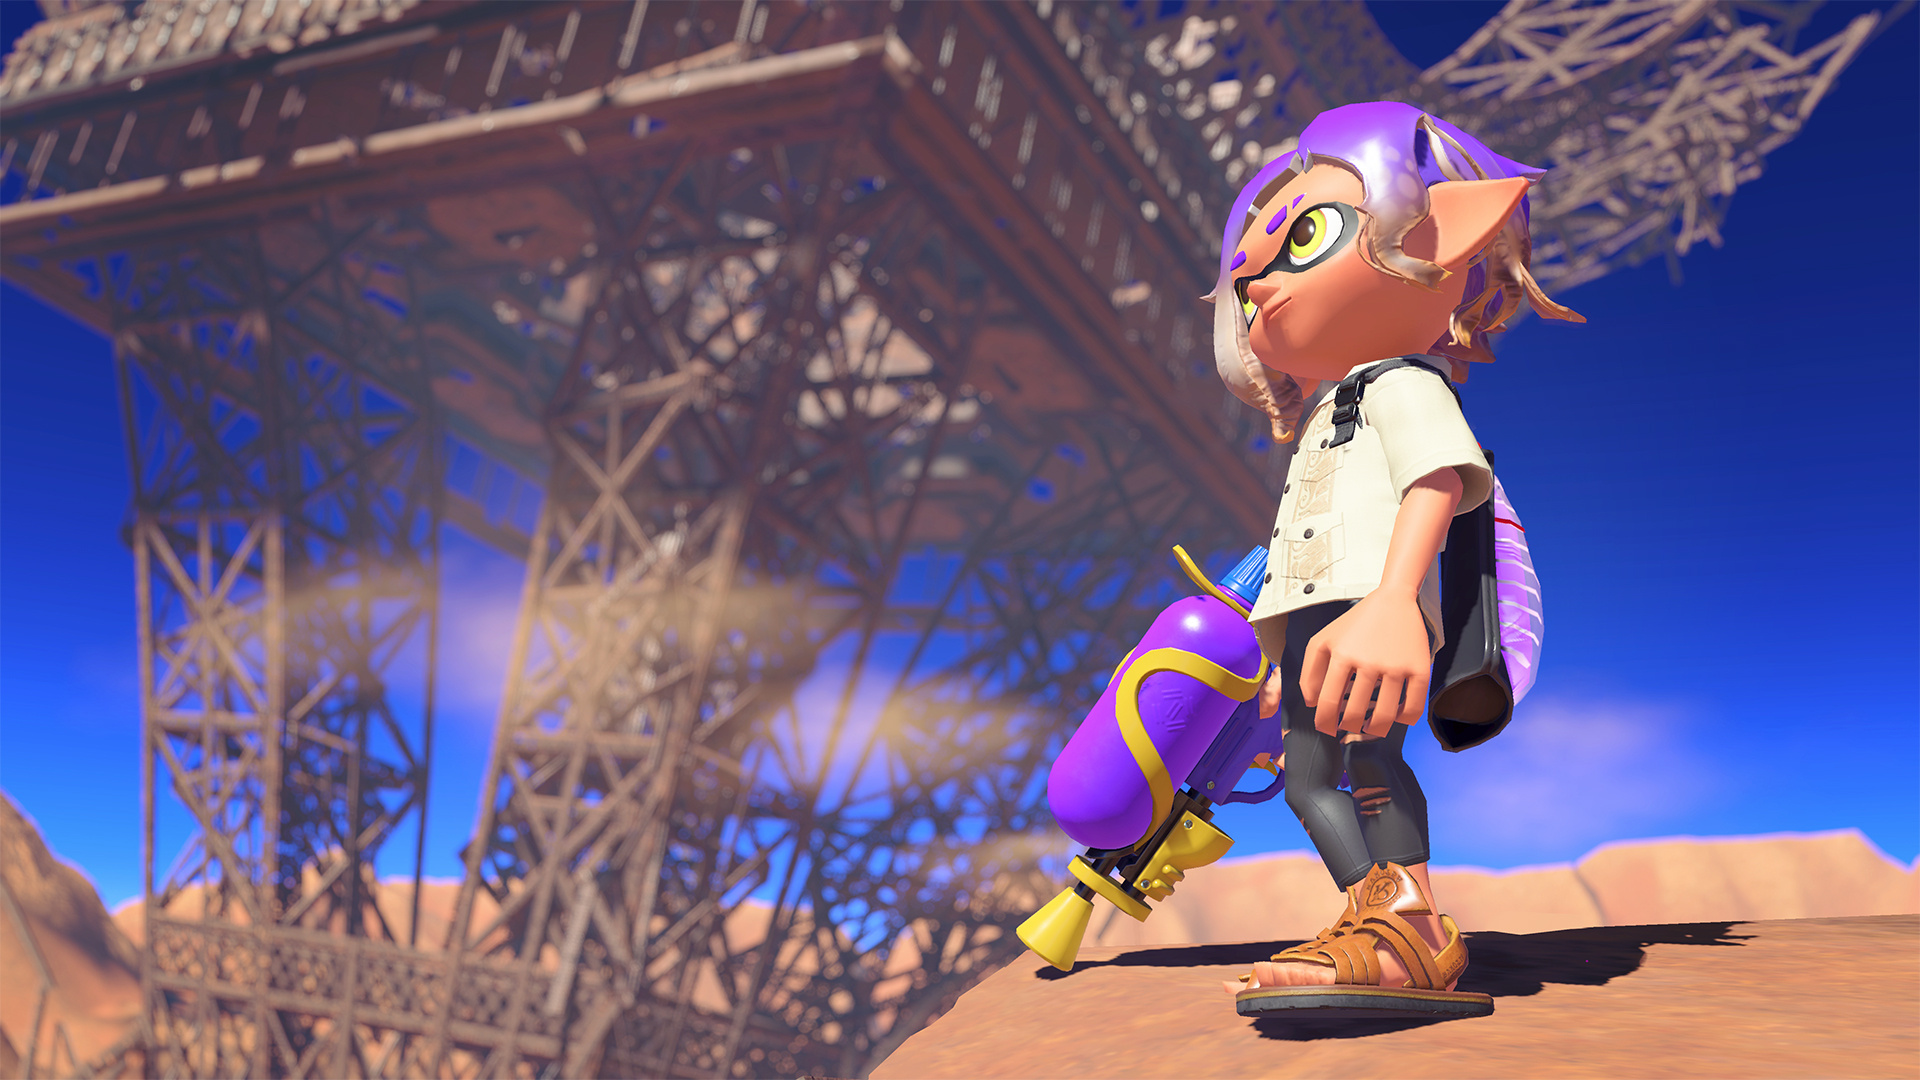 Splatoon 3: Players taking on the role of Inklings or Octolings, The third entry in the series. 1920x1080 Full HD Background.